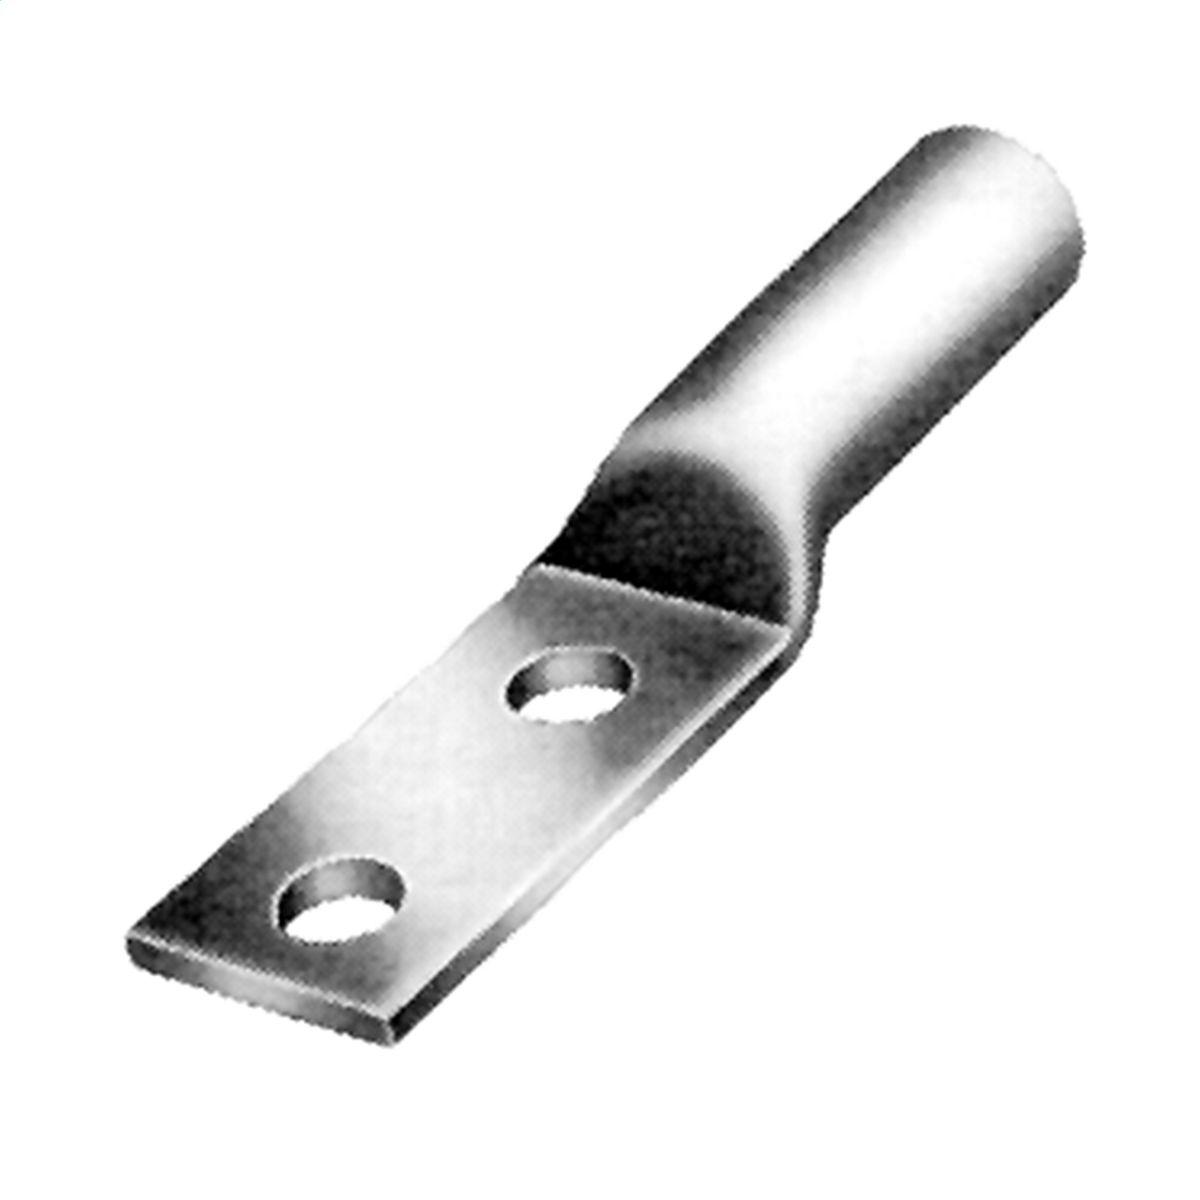 Hubbell VAUL50012 Aluminum Compression Terminal for 450 - 500 AL, 397.5 24/7, 26/7, 477 18/1, 36/1 ACSR, 550 - 600 COMPACT, 1 HOLE  ; Connectors are prefilled with rubber compatible inhibitor and sealed with color coded end caps. ; 